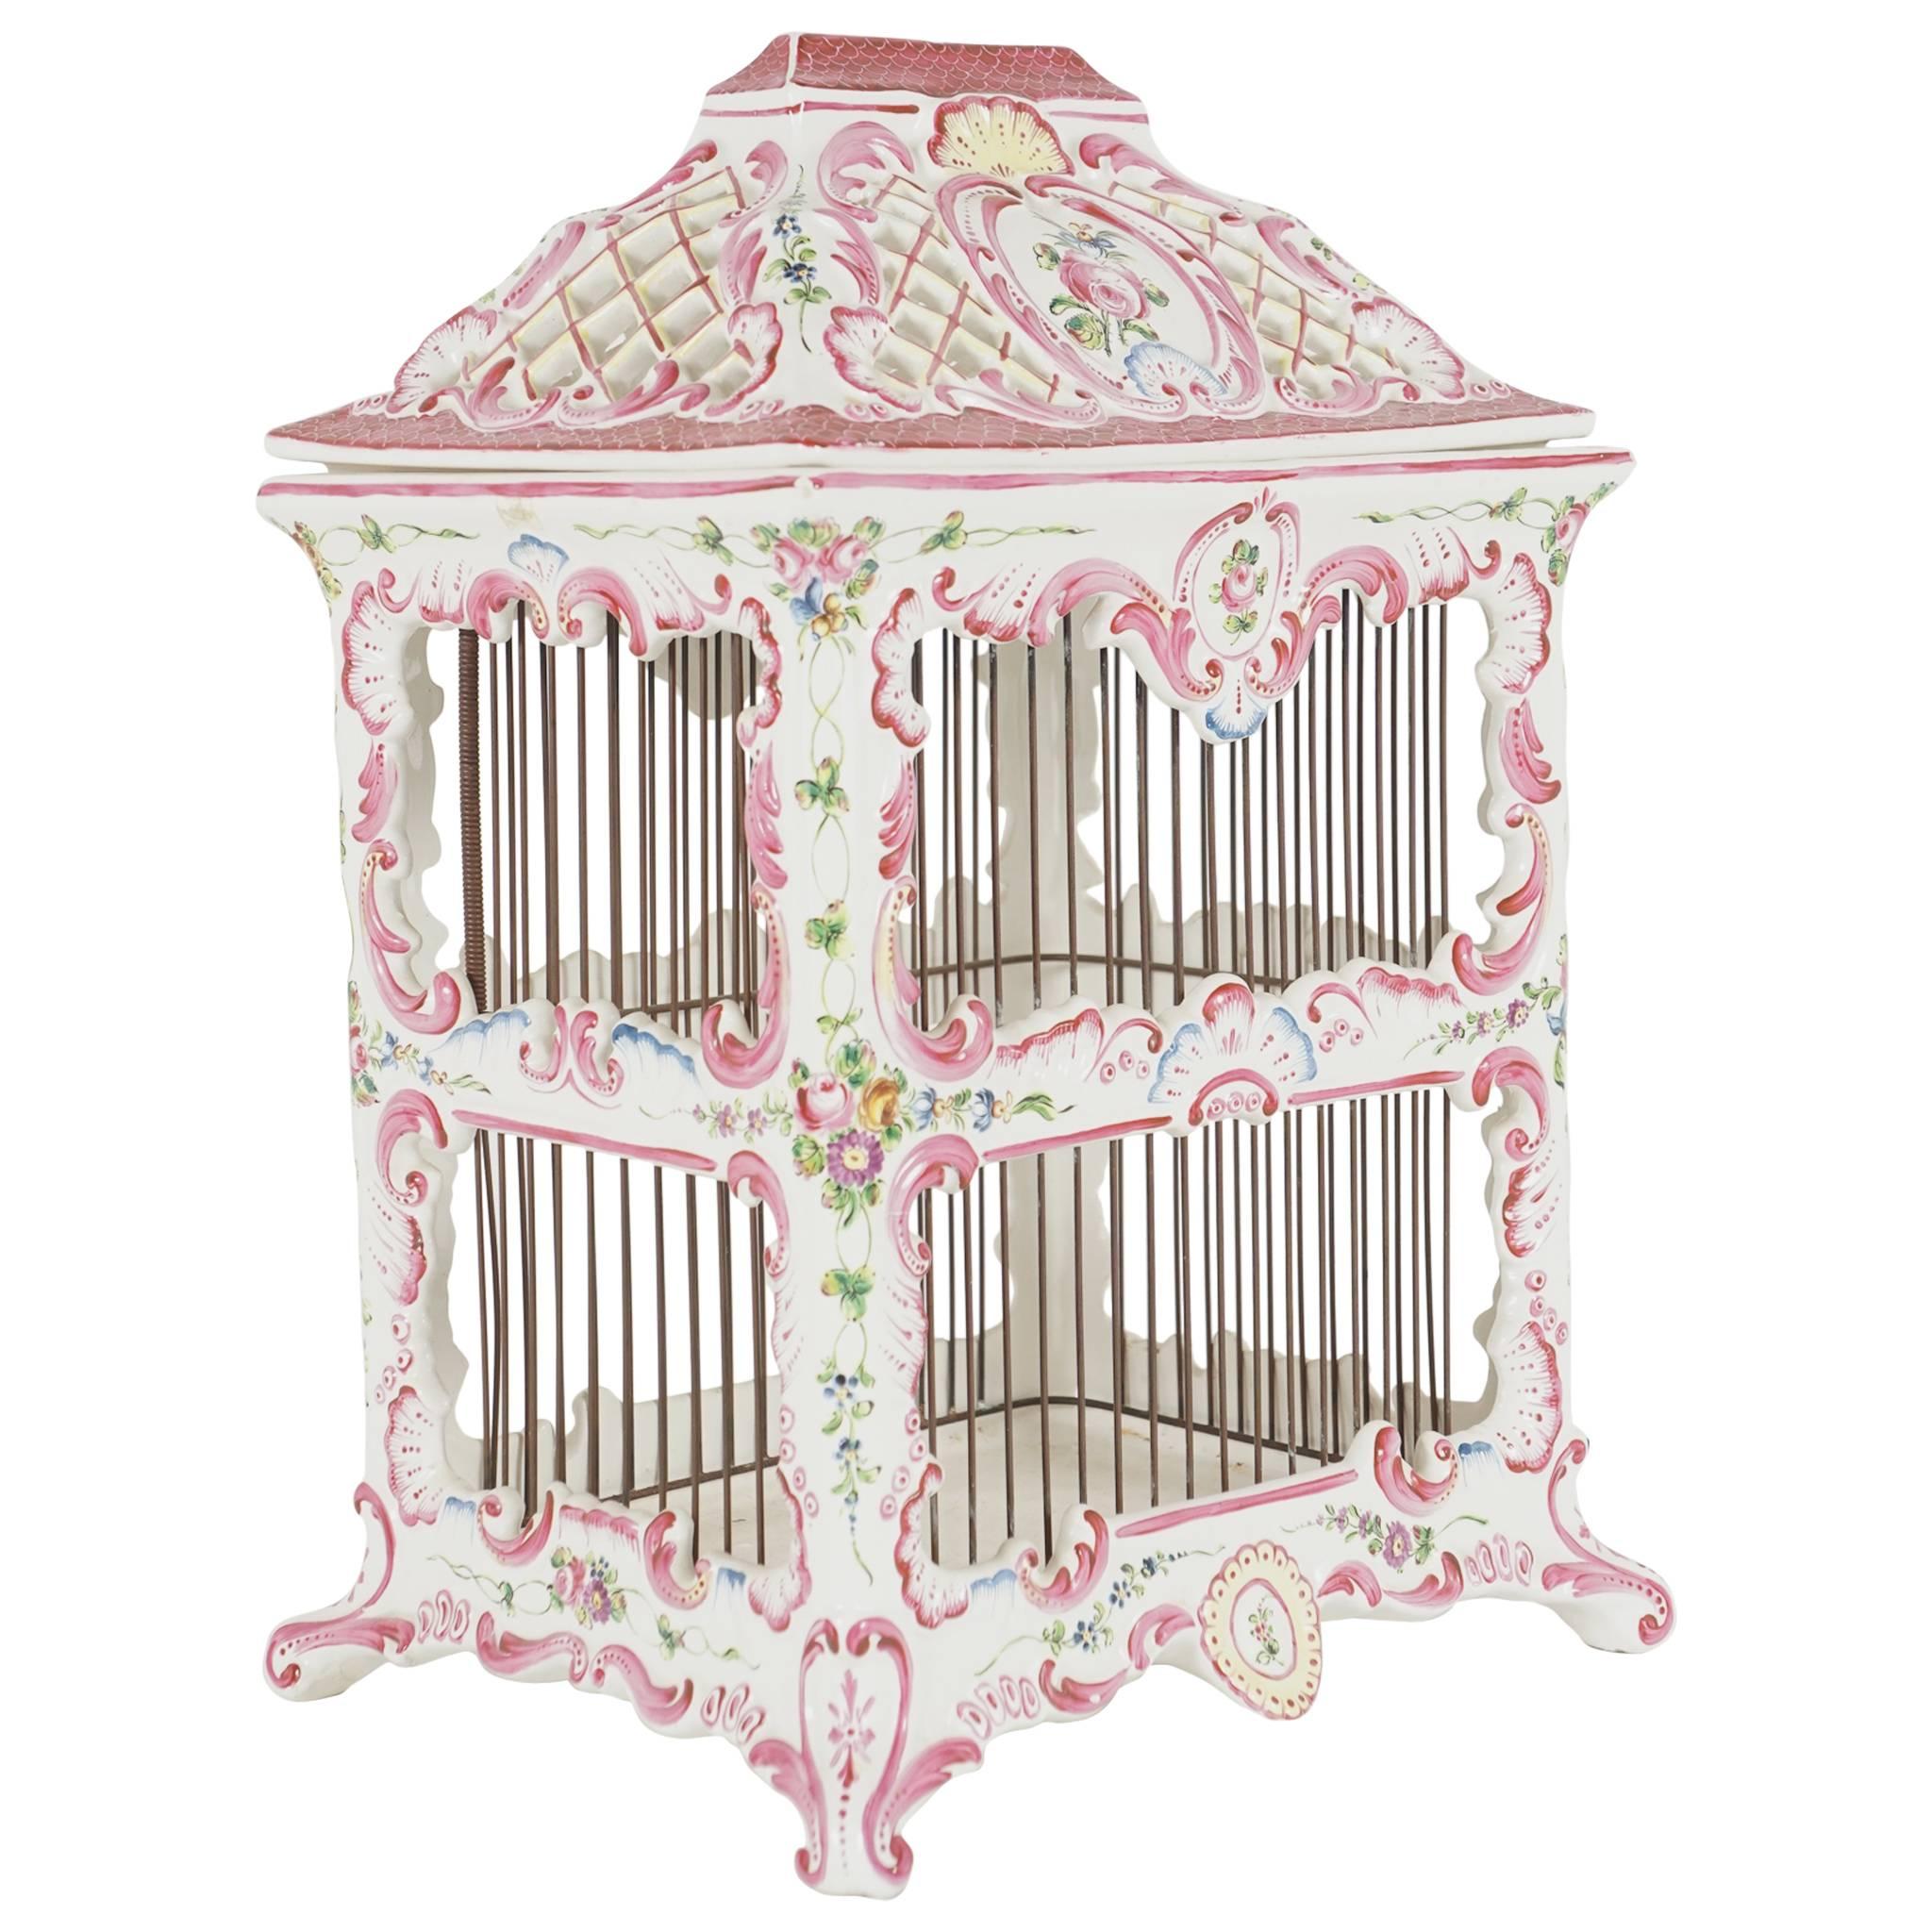 Vintage French Faience Bird Cage from the Estate of Paul & Bunny Mellon